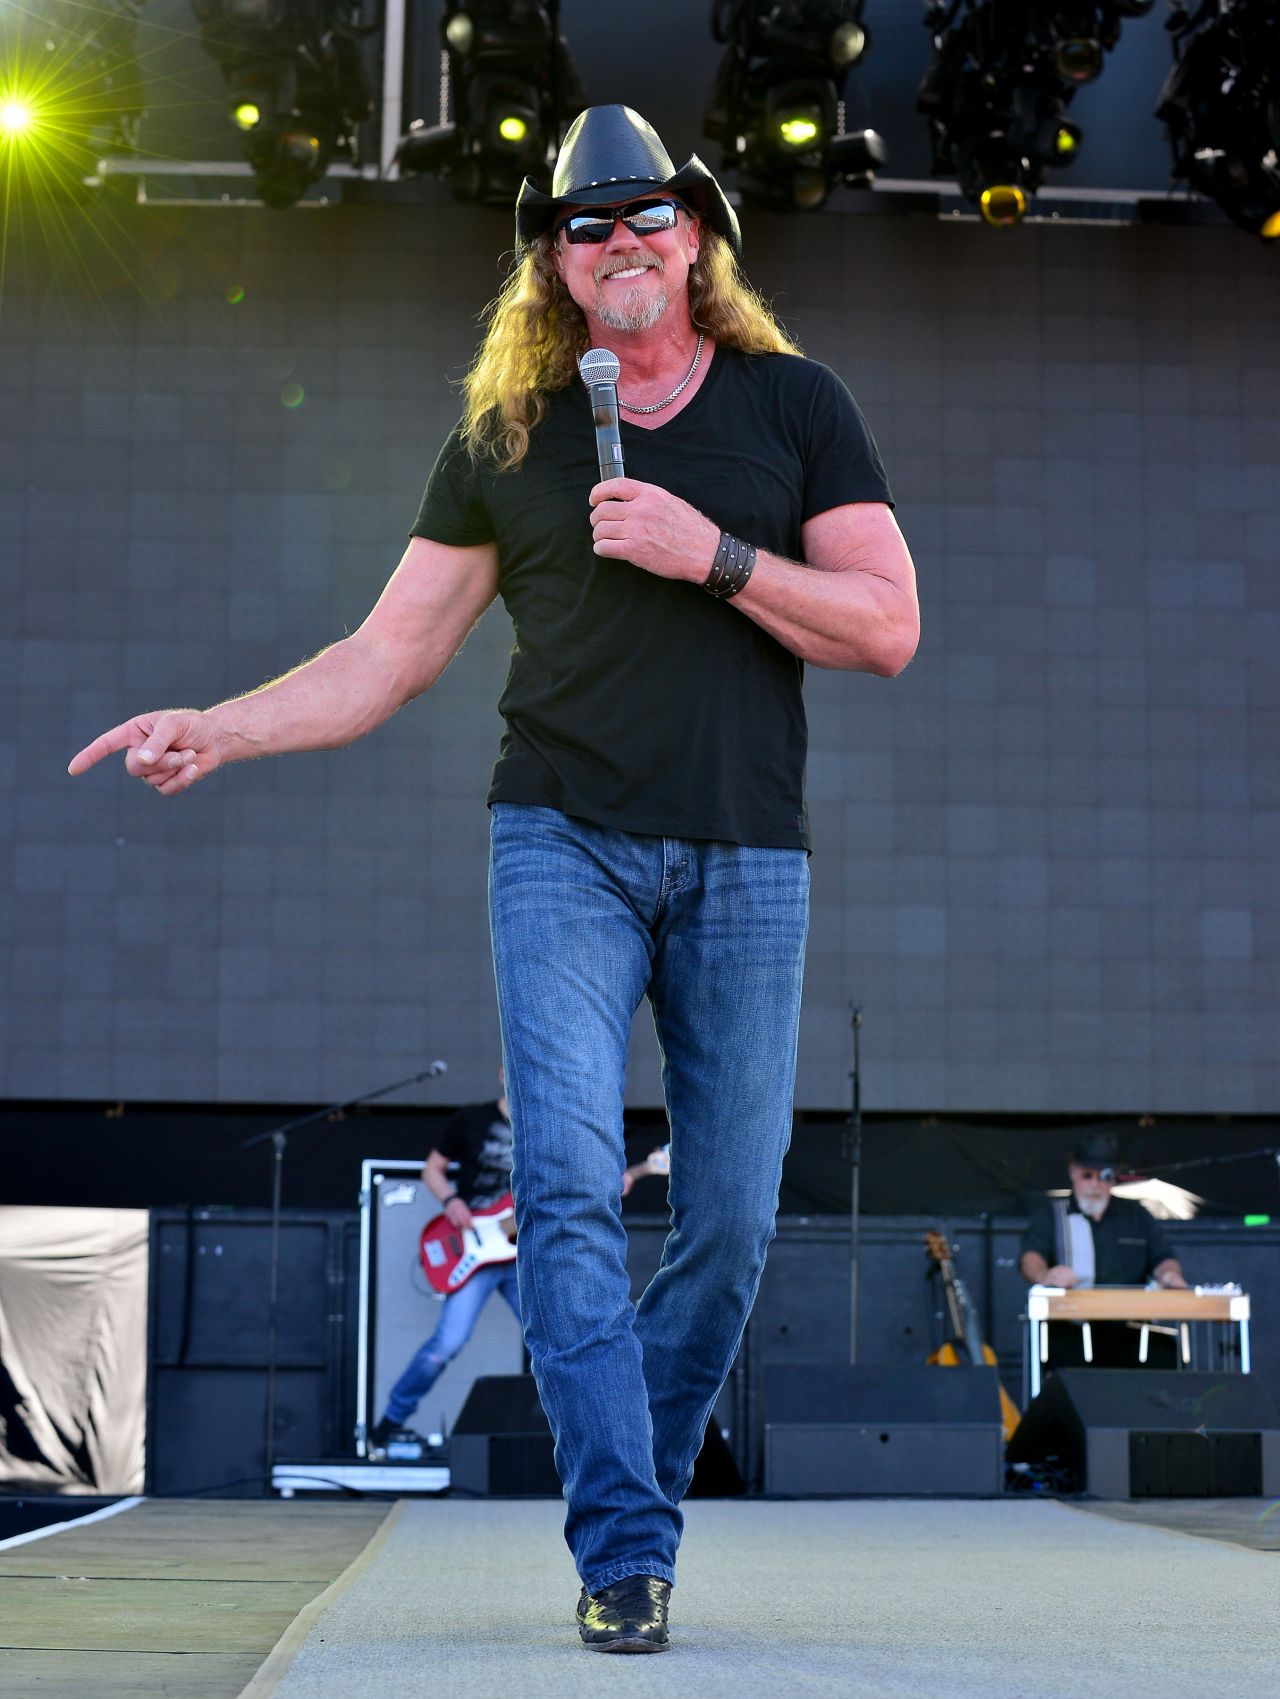 Trace Adkins won the all-star edition of "Celebrity Apprentice" in 2013, five years after being runner-up to Piers Morgan on the original show. The country star has continued to make music and in 2013 released his first Christmas album. 